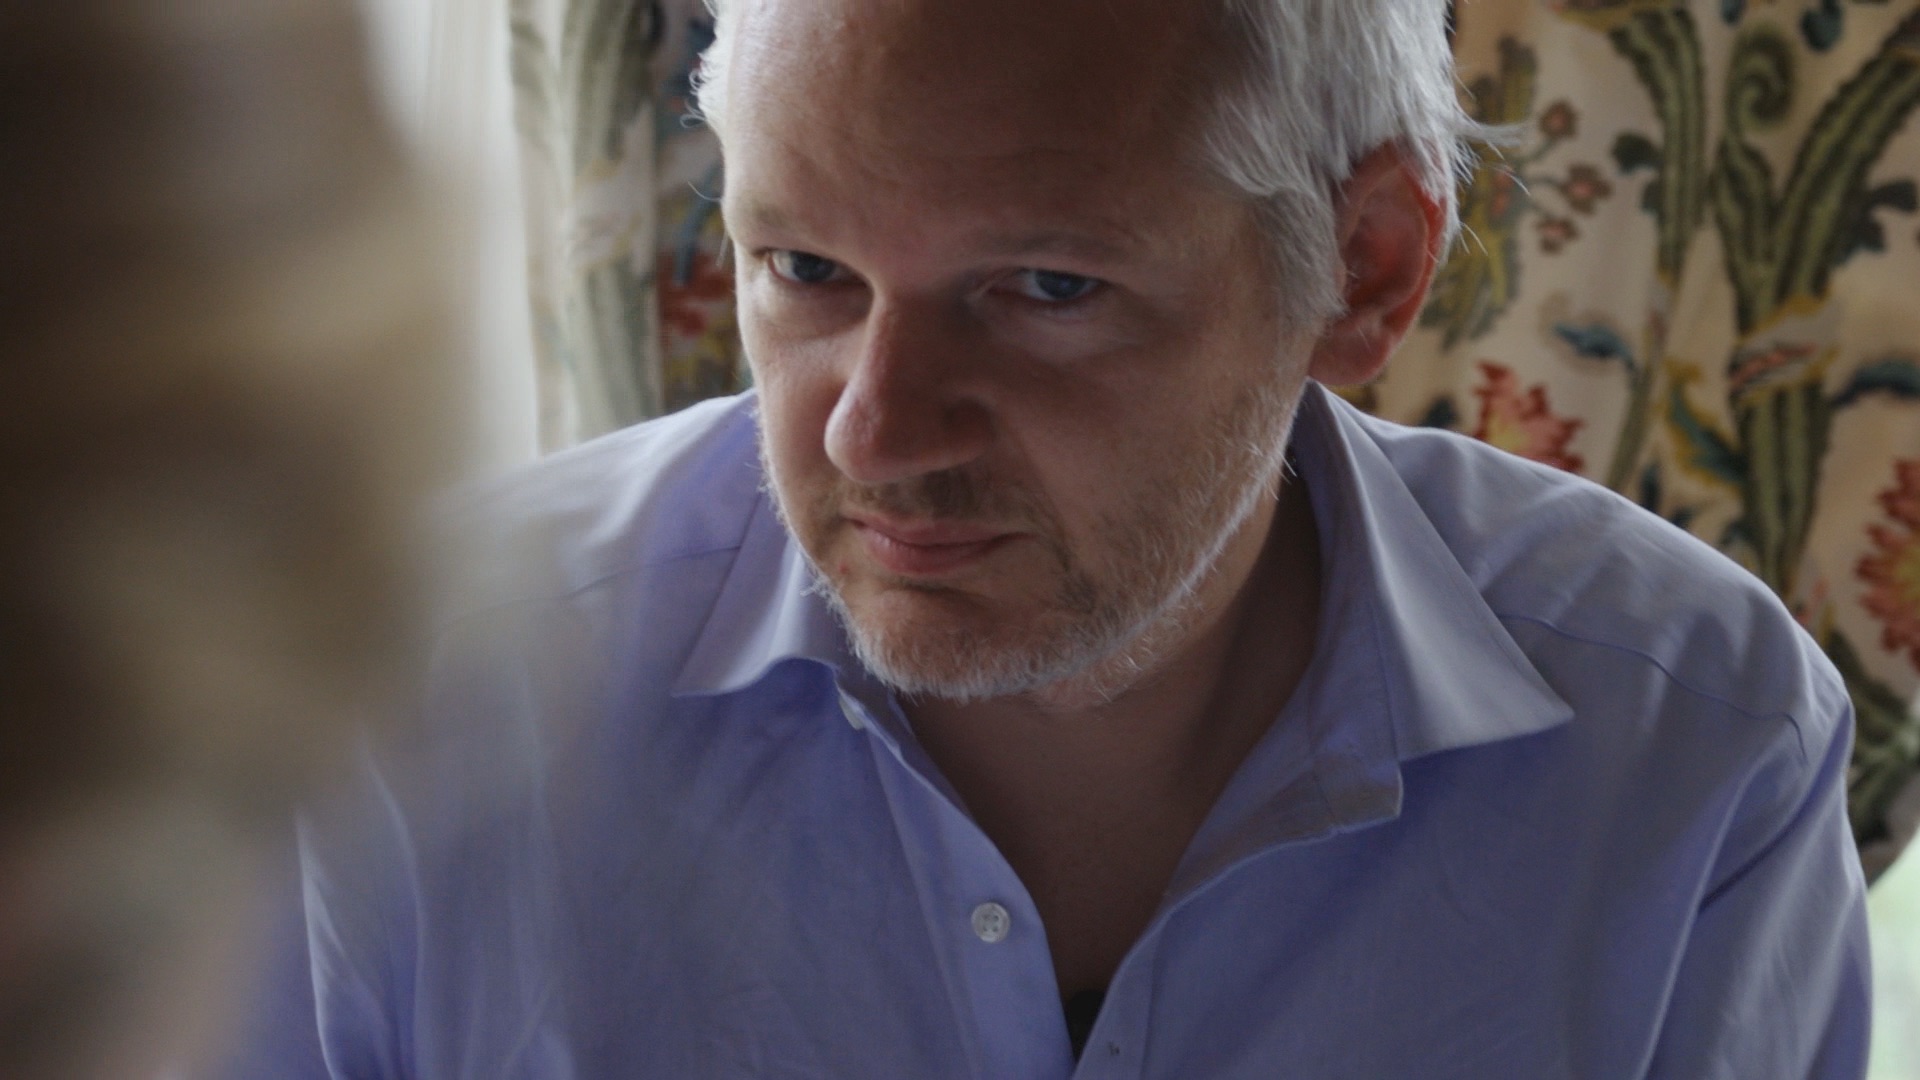 ‘Risk’ Is a Documentary About Becoming Disillusioned With Julian